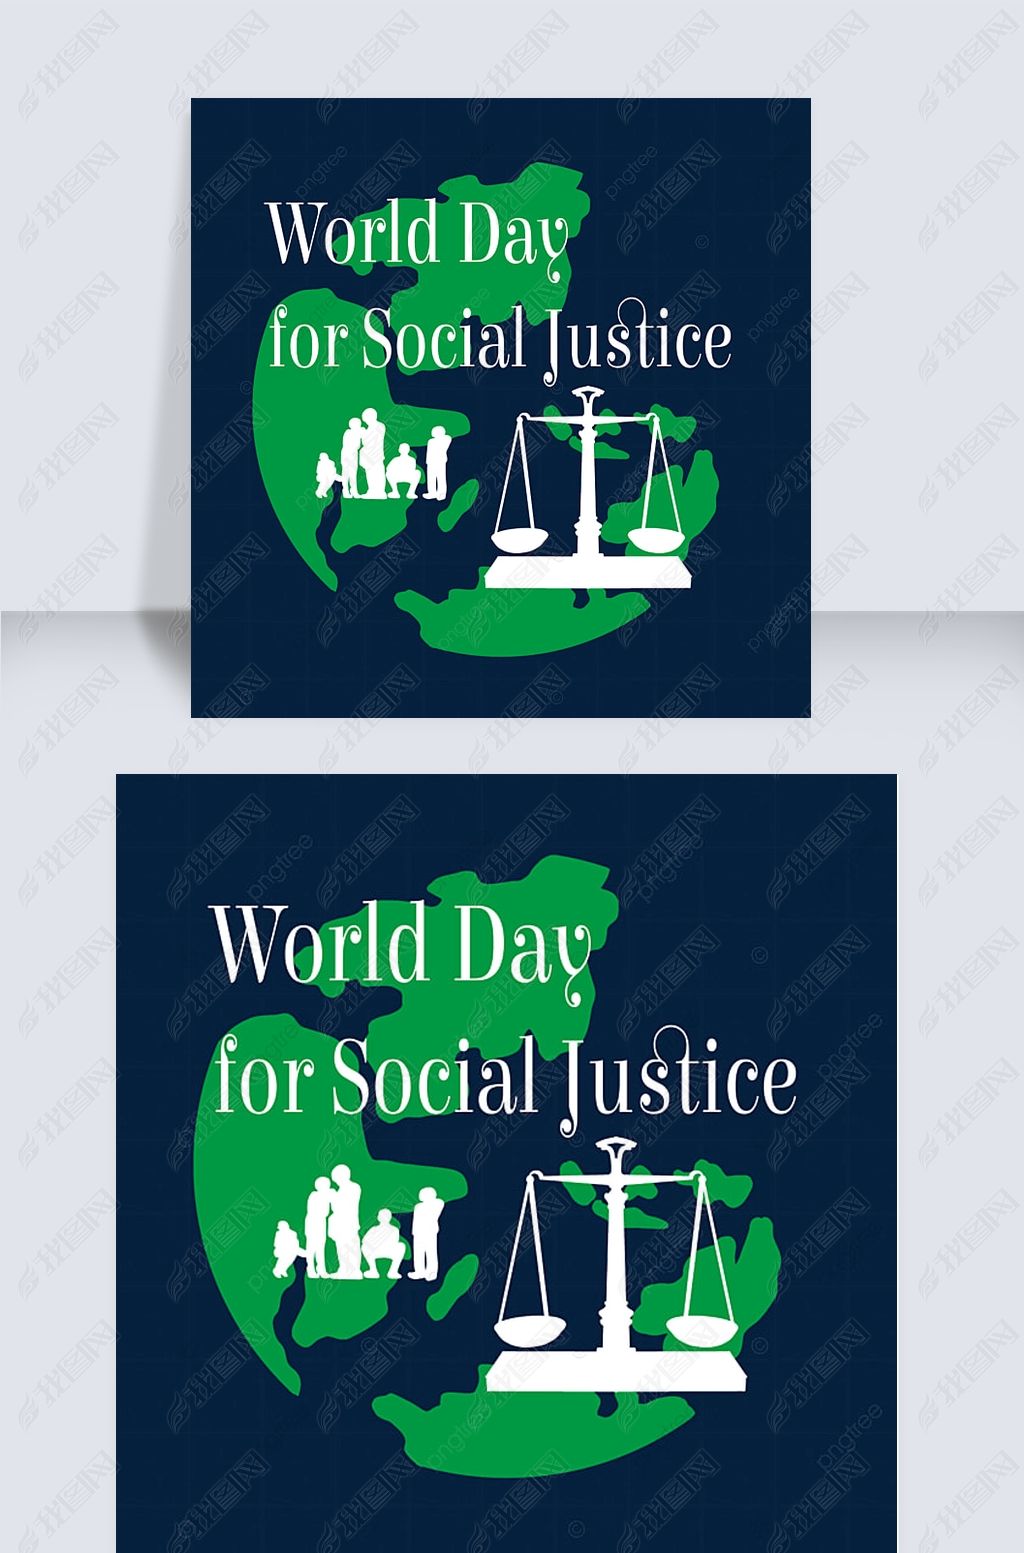 world day for social justiceṫ